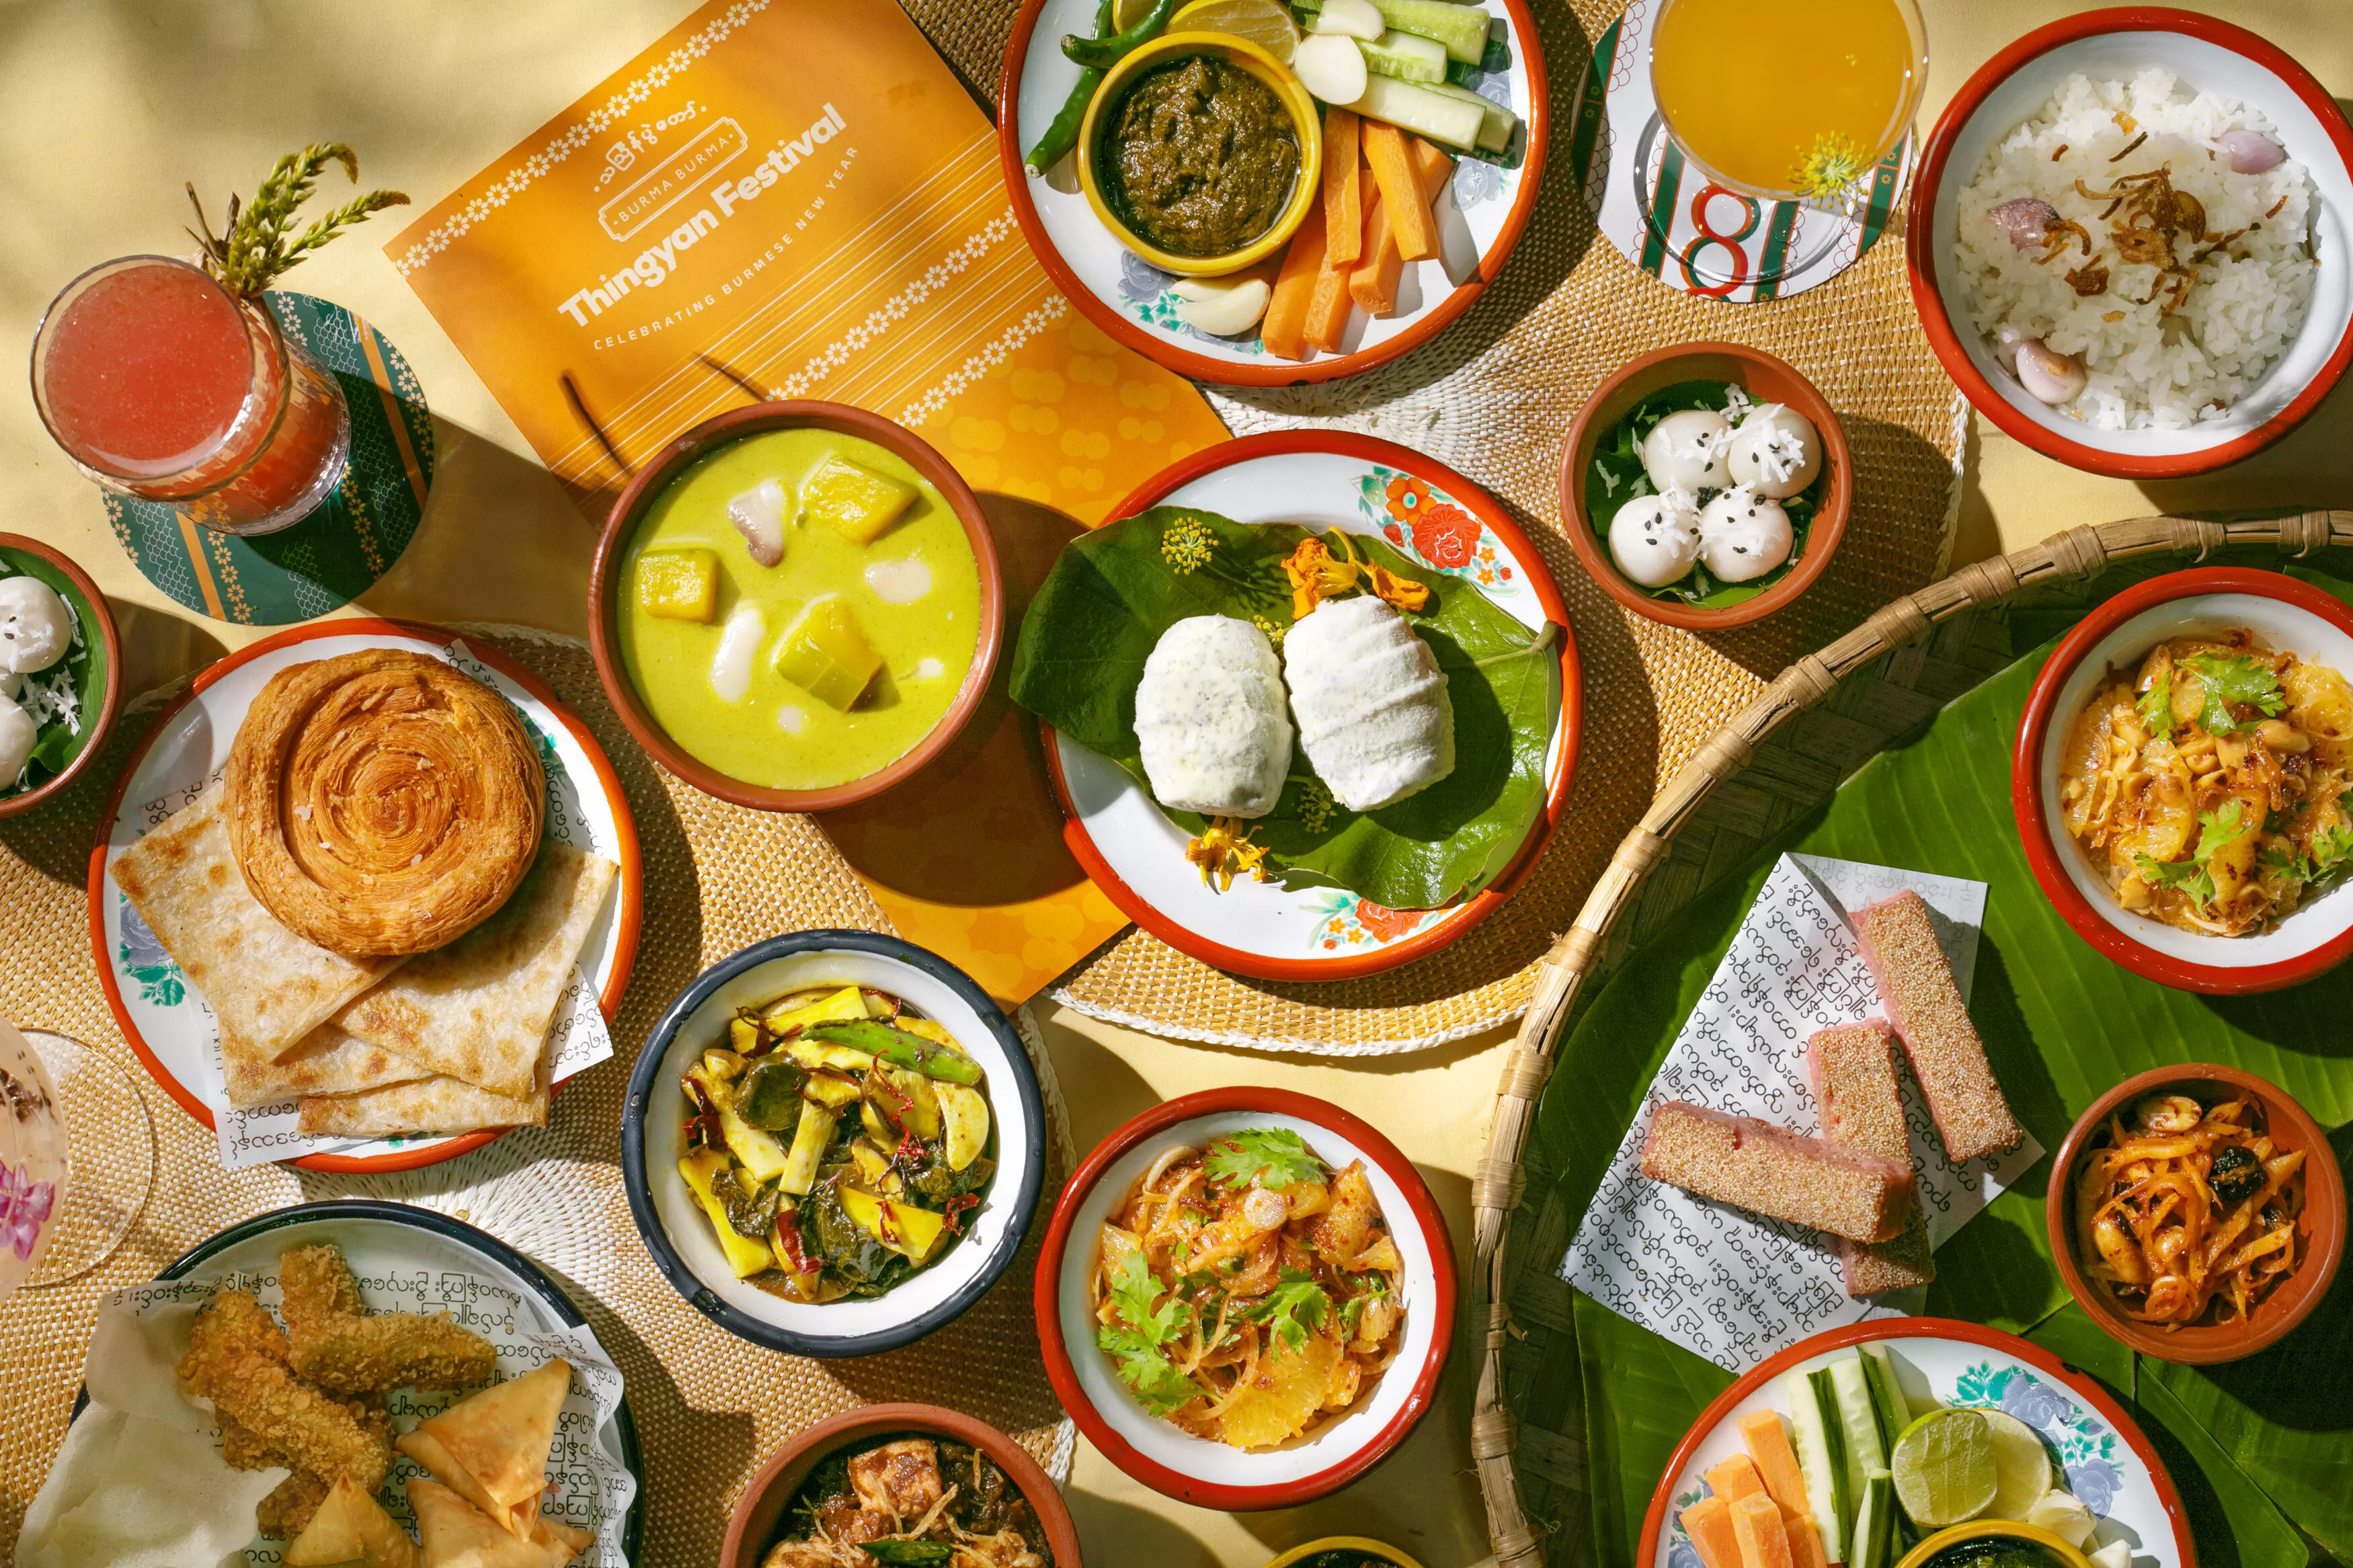 Celebrate Thingyan in Style: Indulge in Burma Burmas Limited Edition Culinary Delights